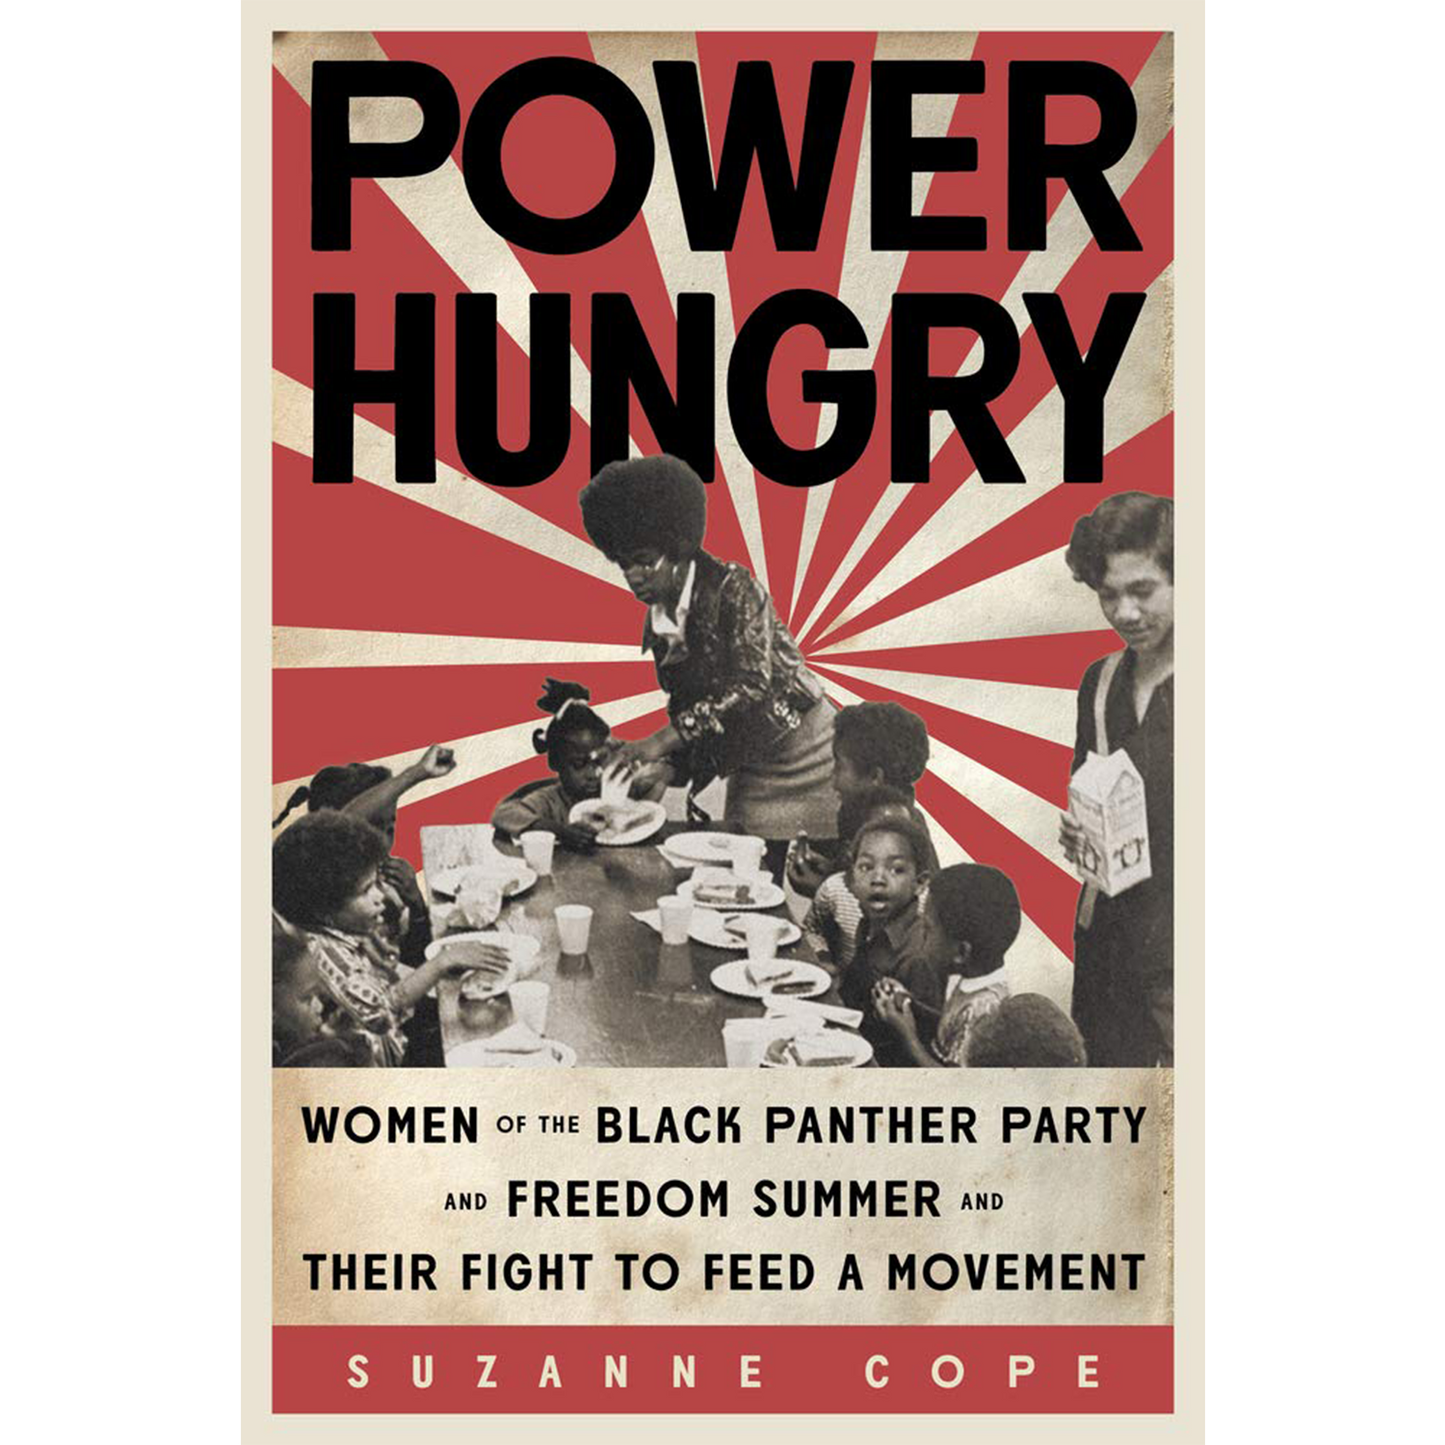 Power Hungry: Women of the Black Panther Party and Freedom Summer and Their Fight to Feed a Movement